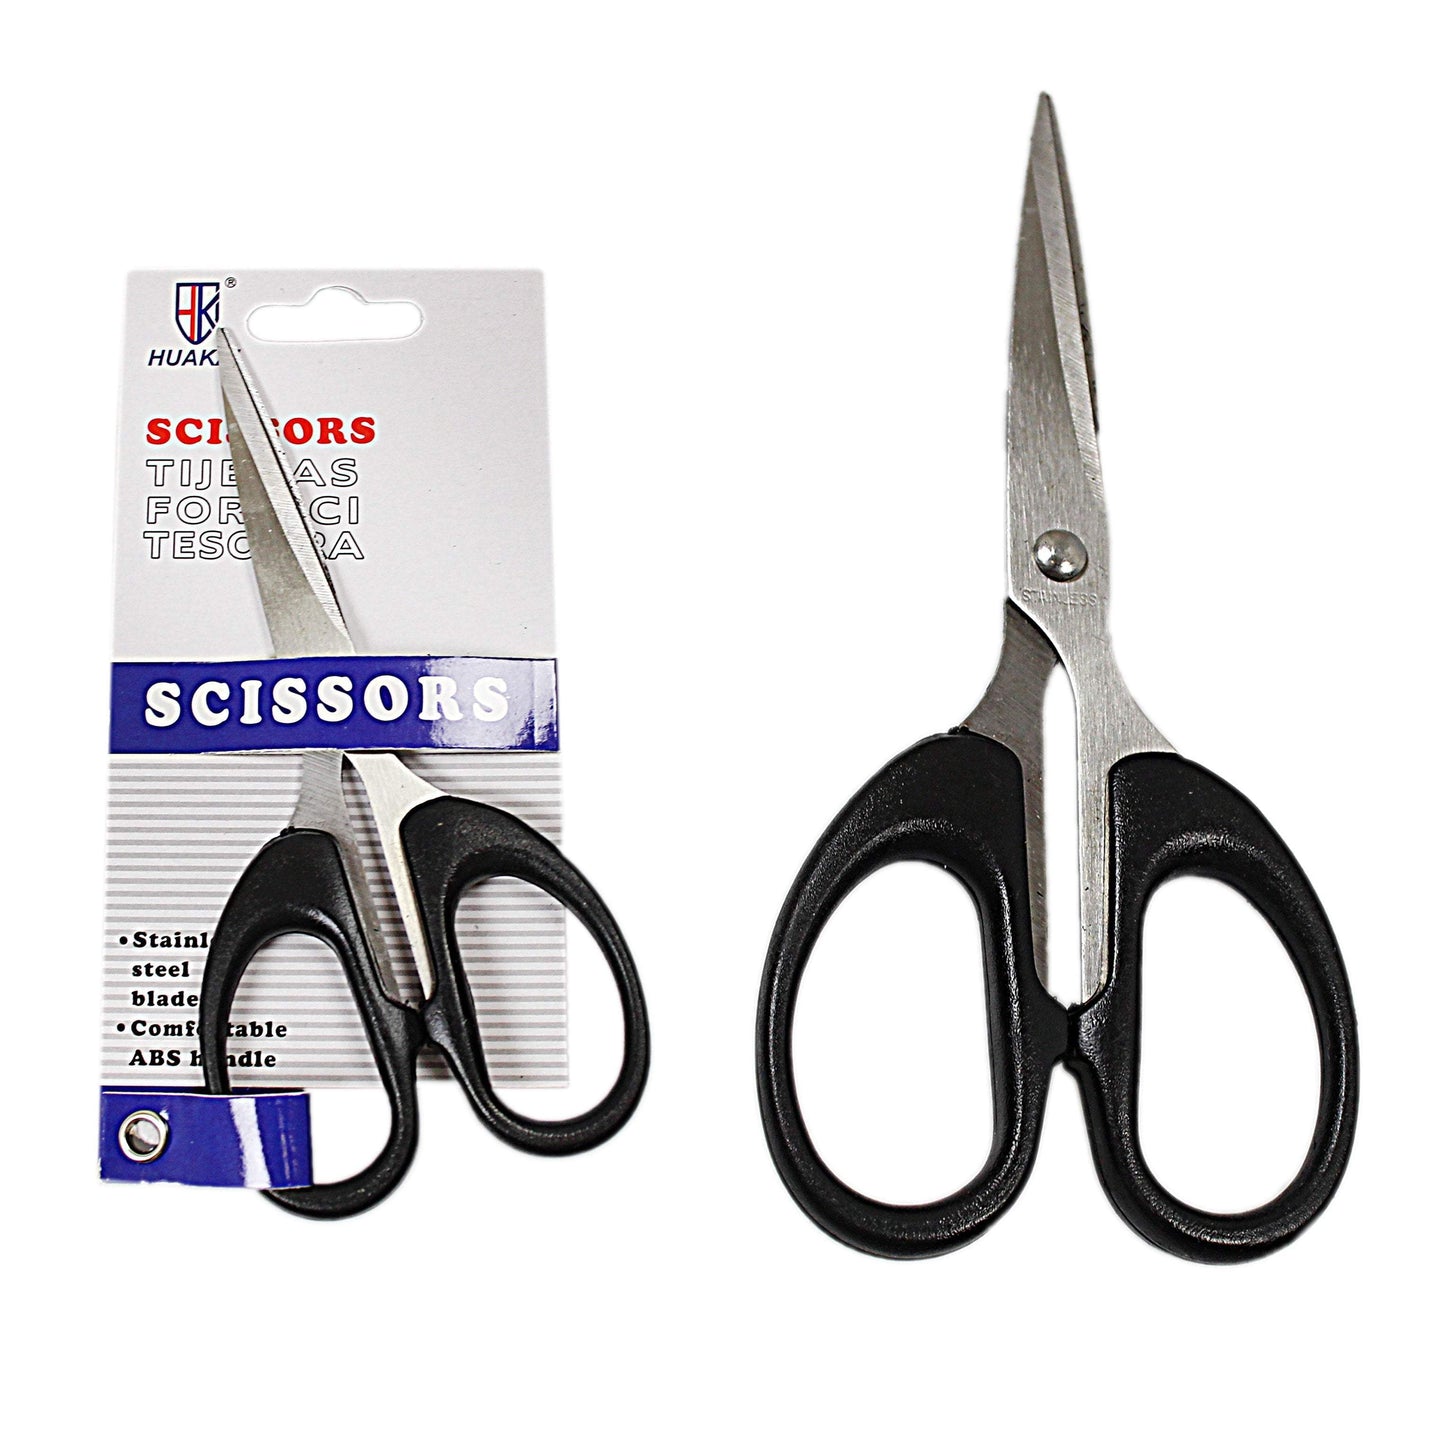 Stainless Steel Basic Scissors With ABS Handle Comfortable Grip 3683 (Large Letter Rate)